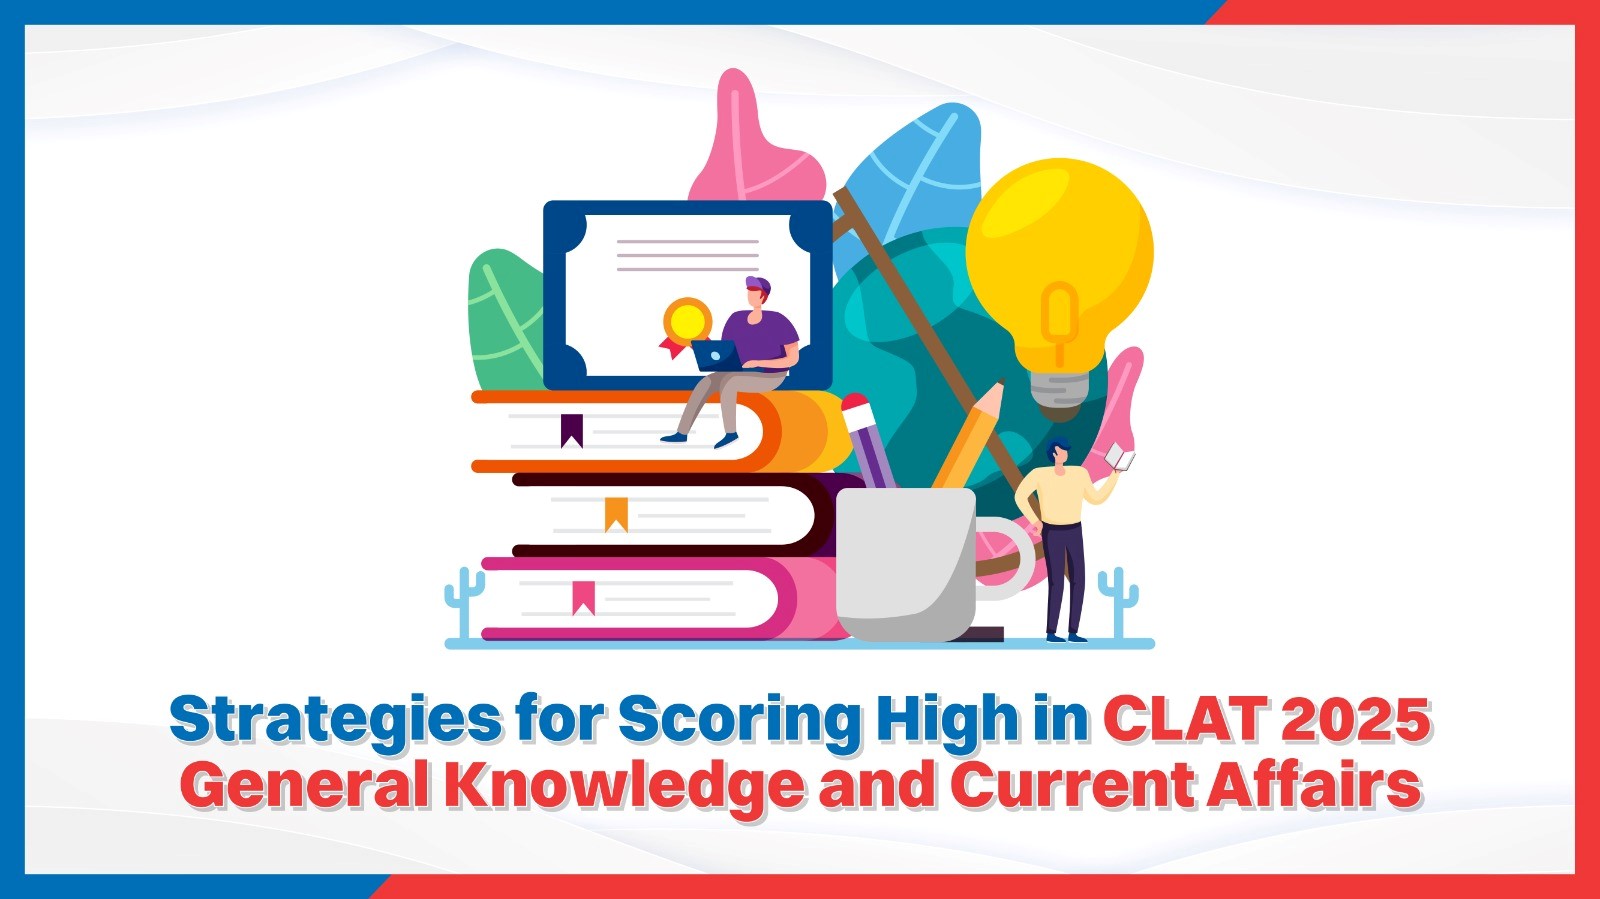 Strategies for Scoring High in CLAT 2025 General Knowledge and Current Affairs.jpg